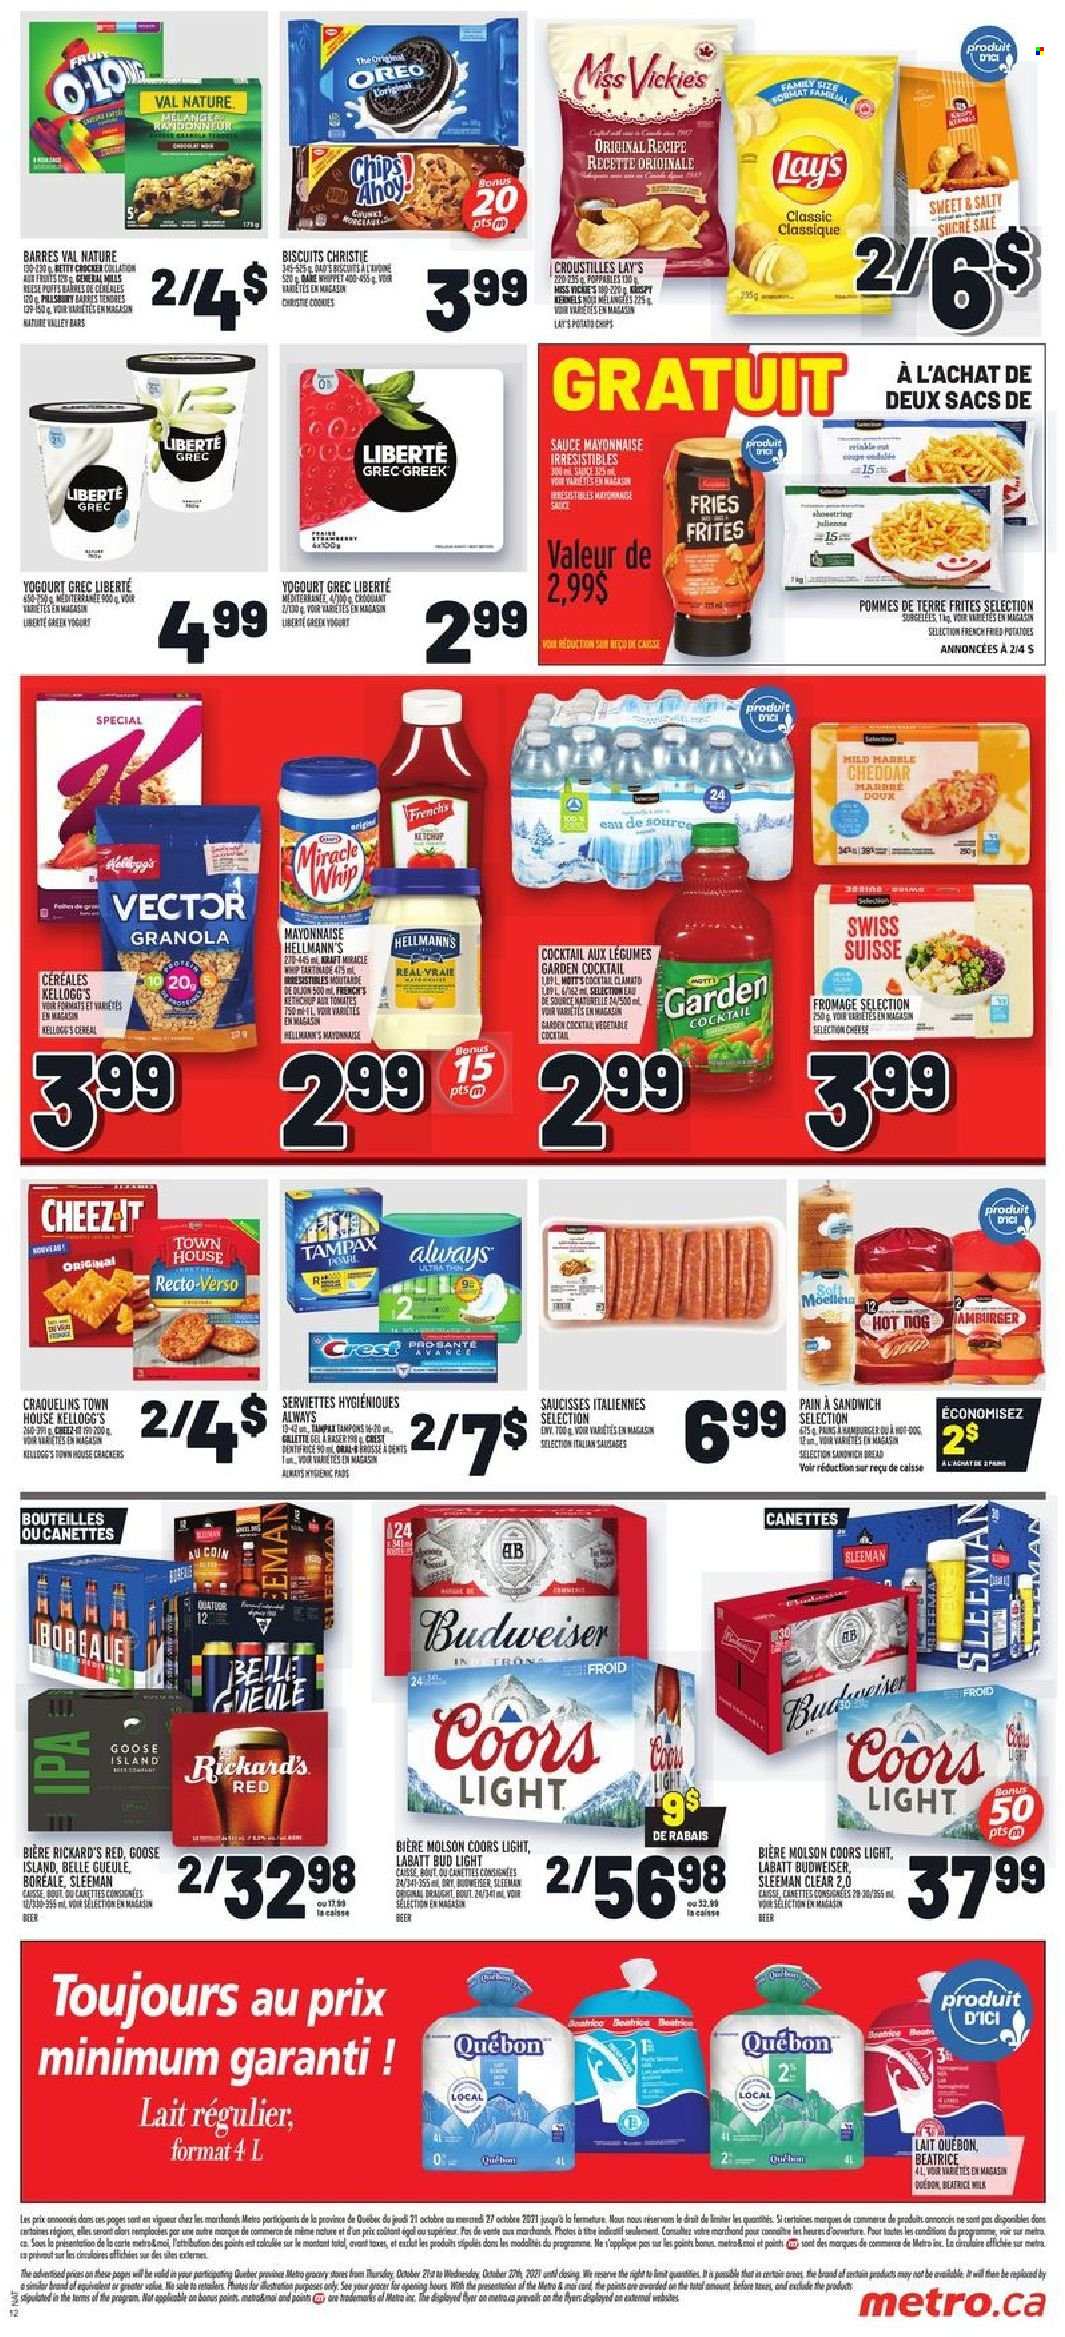 thumbnail - Metro Flyer - October 21, 2021 - October 27, 2021 - Sales products - bread, Bella, Mott's, sauce, sausage, cheddar, cheese, milk, mayonnaise, Miracle Whip, Hellmann’s, potato fries, crackers, Kellogg's, biscuit, Lay’s, rice, Clamato, beer, Bud Light, IPA, Oreo, Budweiser, granola, Tampax, Coors. Page 2.